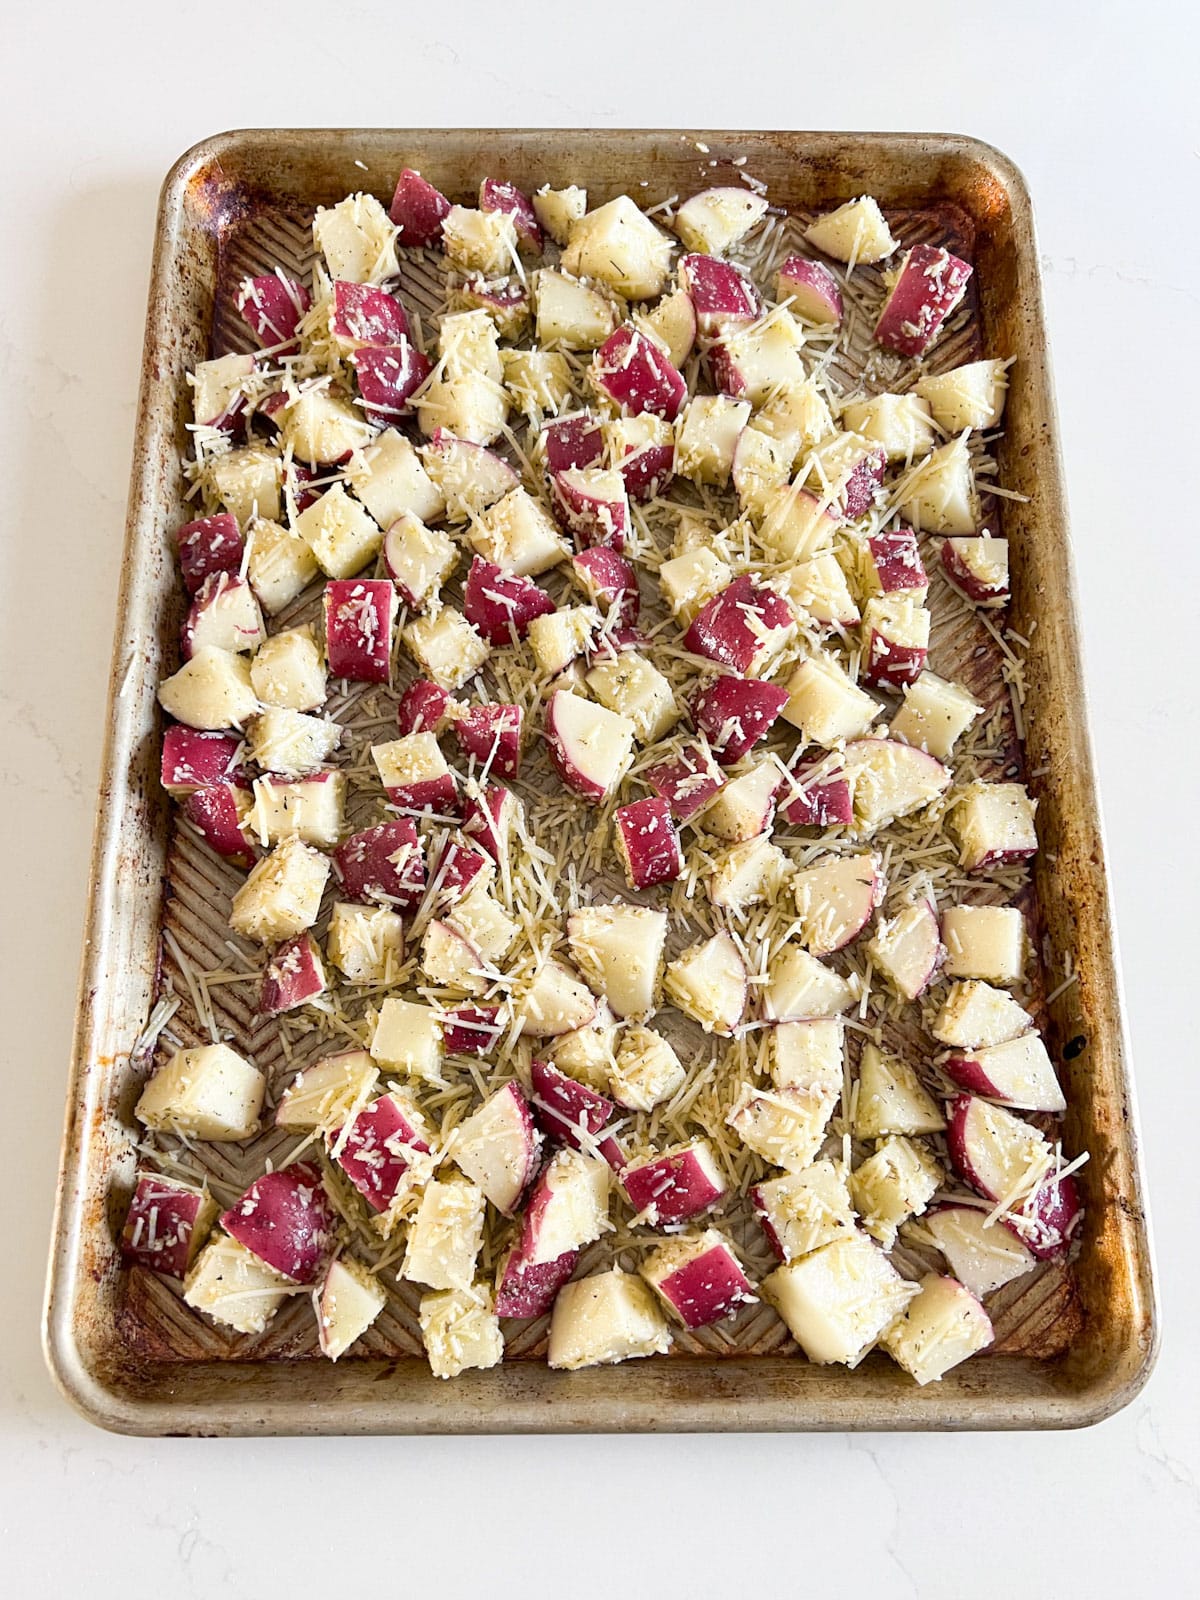 A sheet pan with the potato and cheese mixture spread on it.